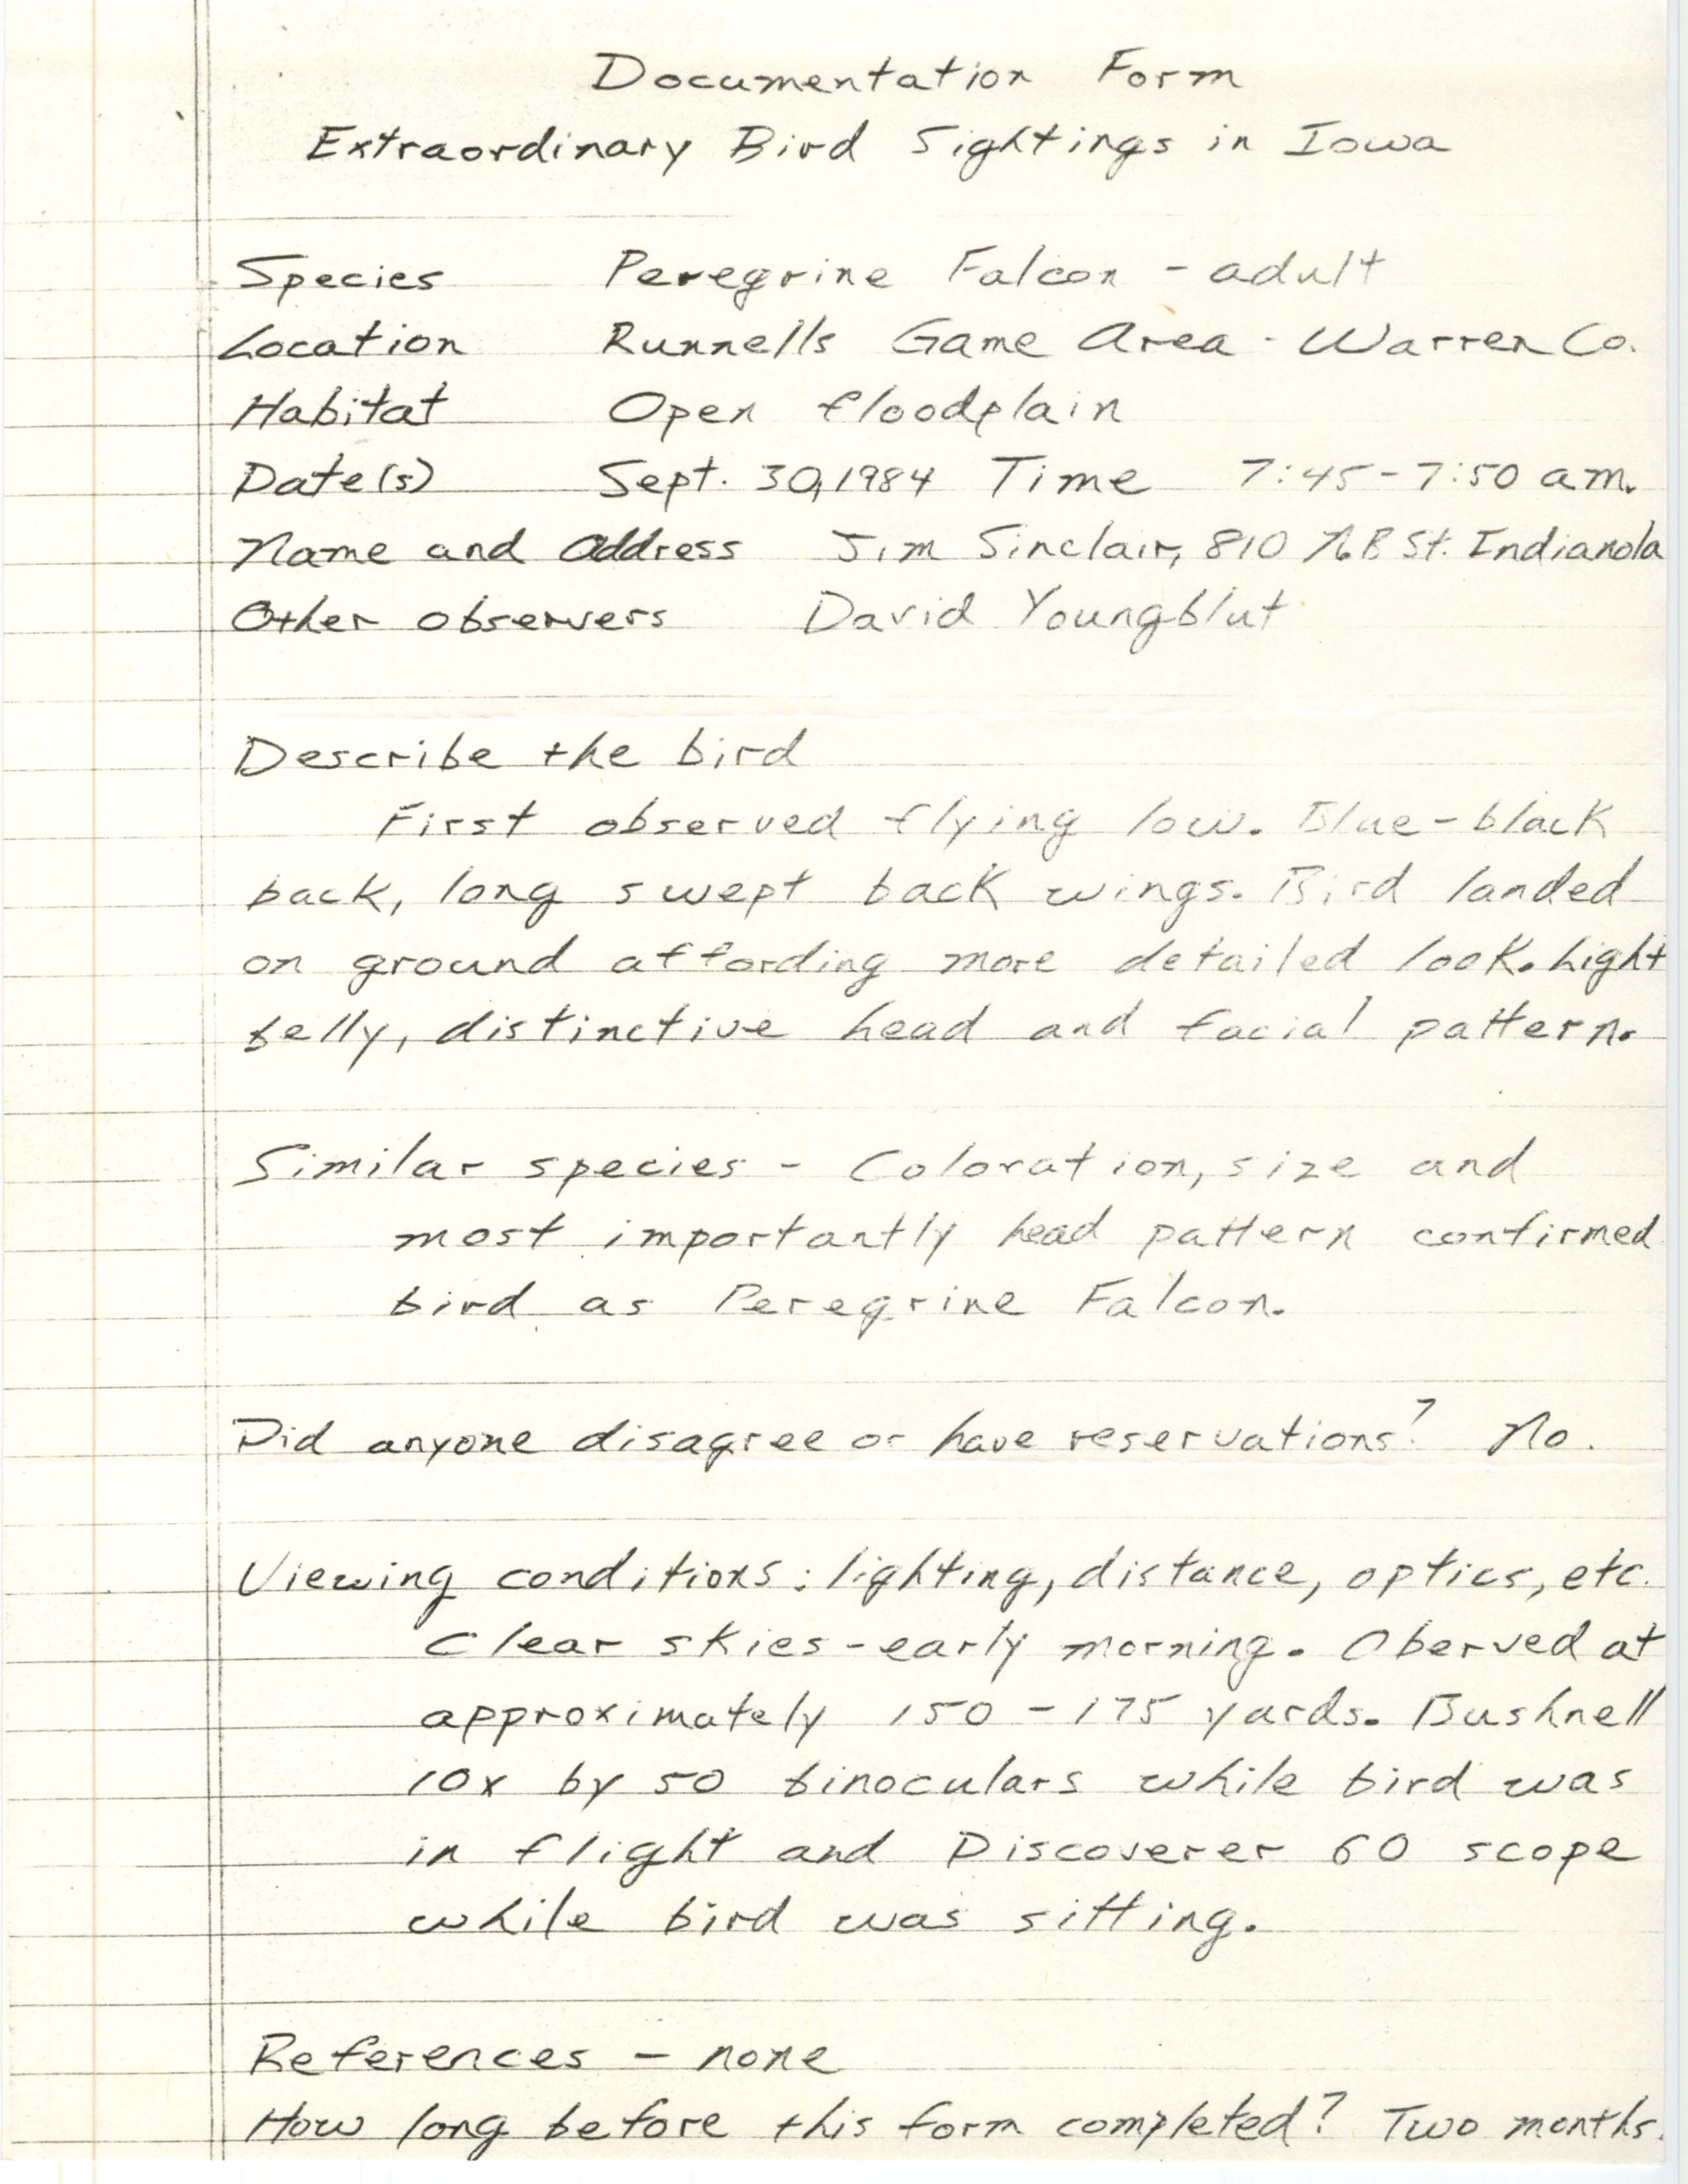 Rare bird documentation form for Peregrine Falcon at Runnells Game Area, 1984